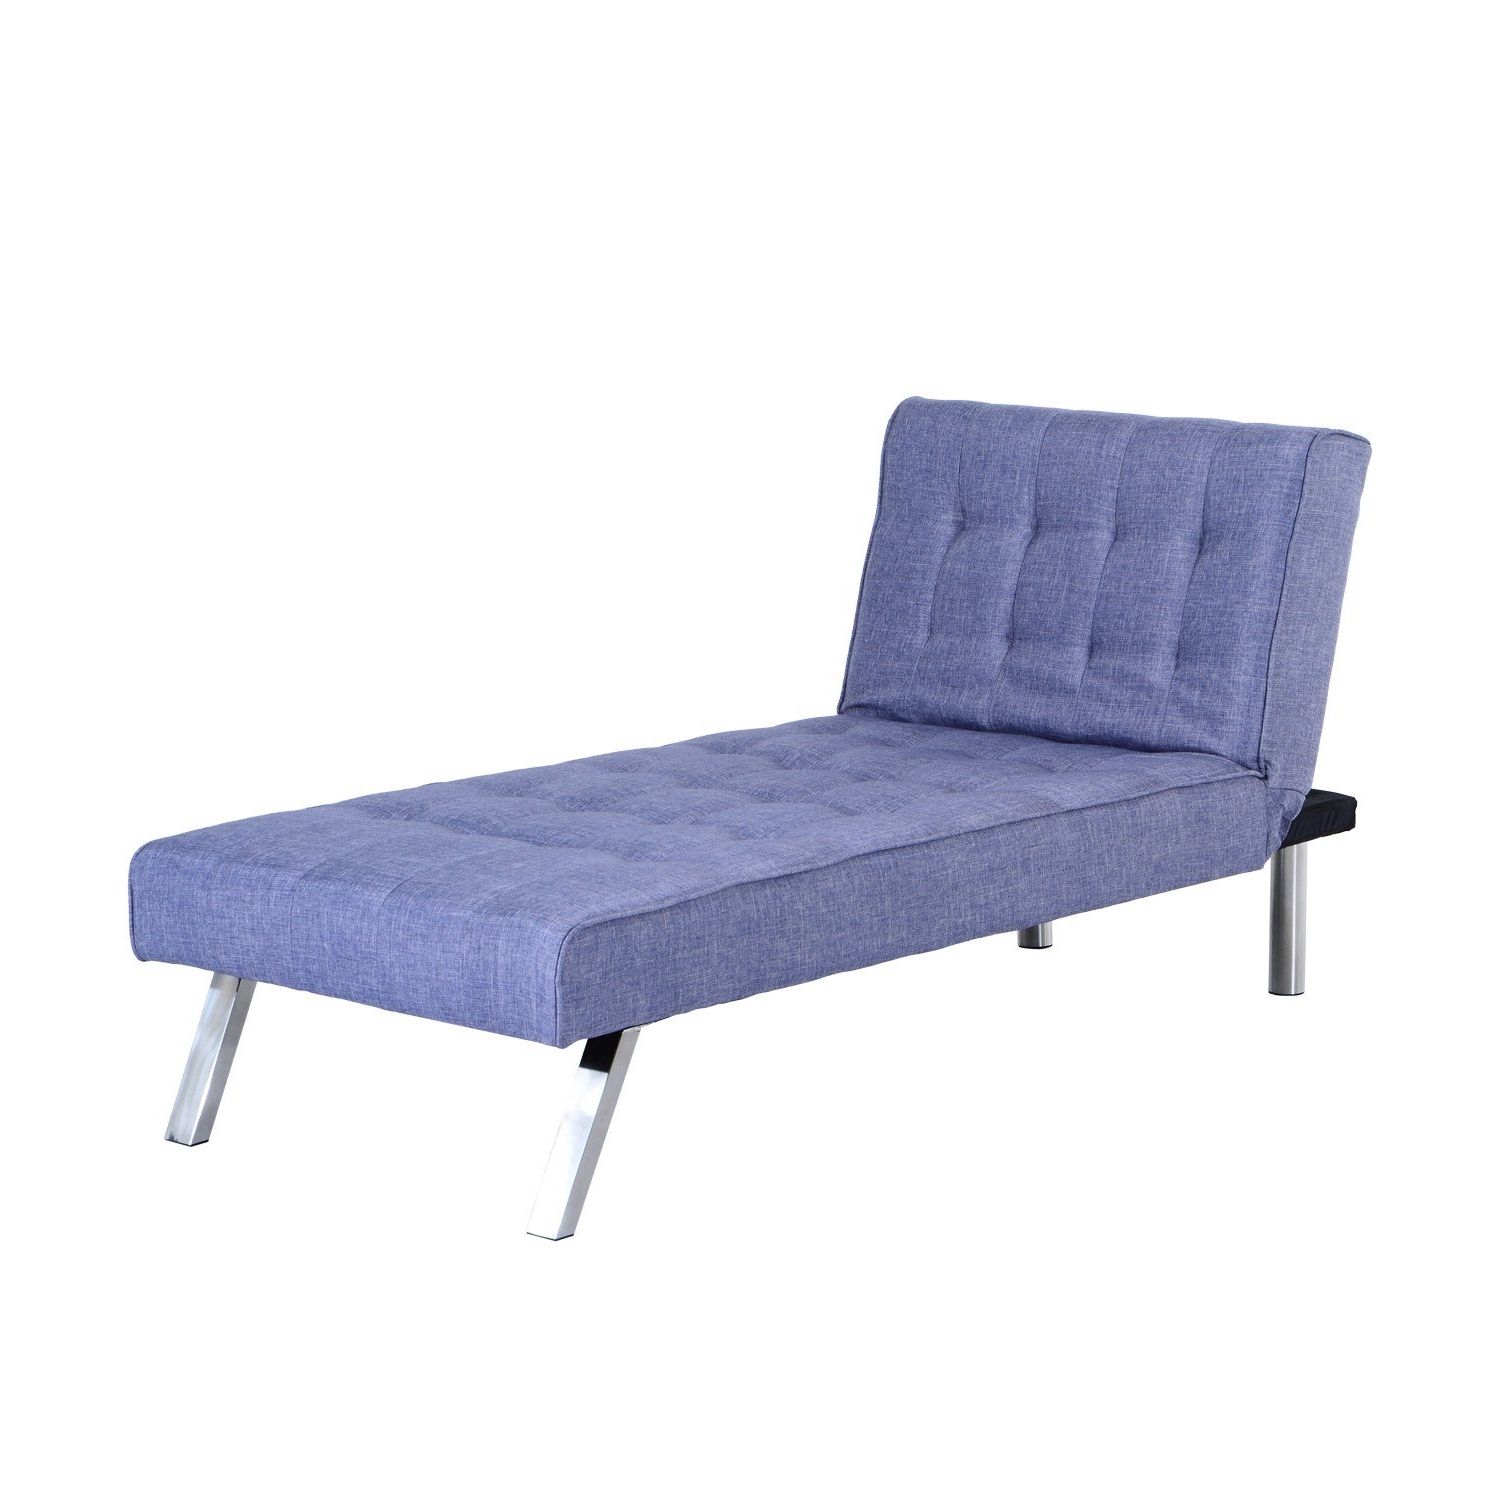 Chaise Lounge Sleeper Sofas In Well Known Homcom 71" Modern Reclining Chaise Lounge Chair Sleeper Sofa Bed (View 5 of 15)